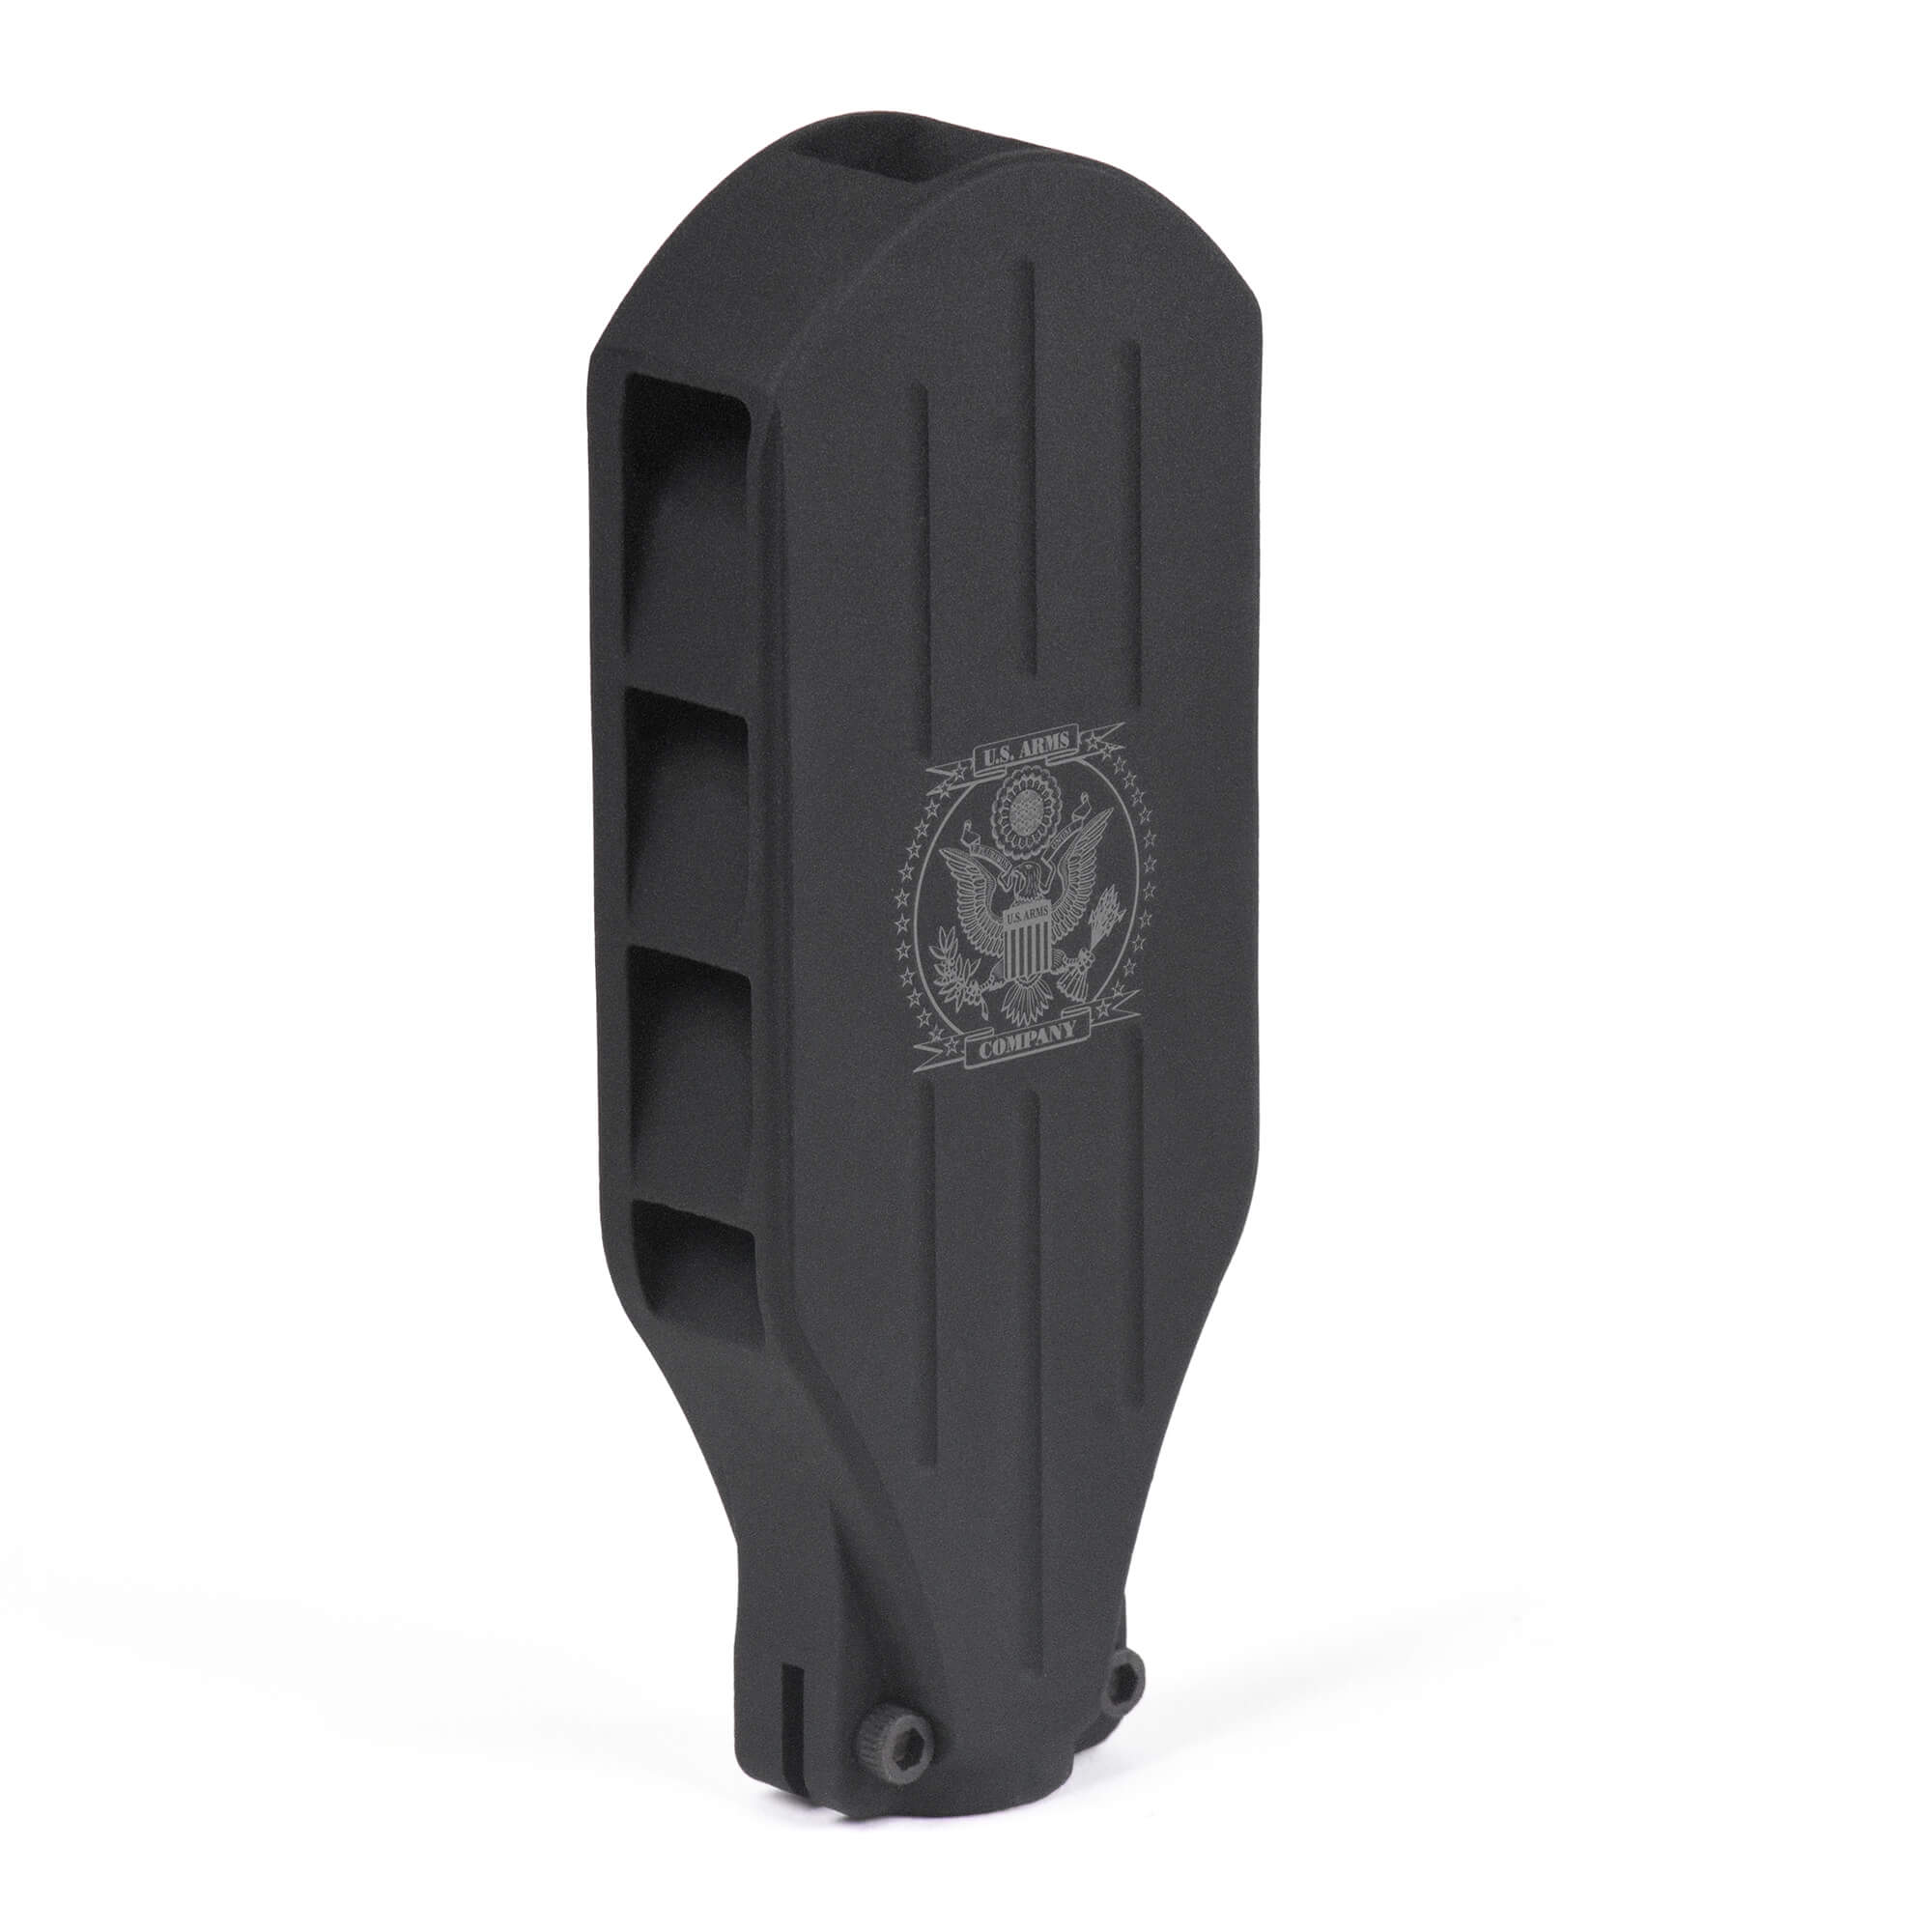 muzzle brake standing view with USAC logo